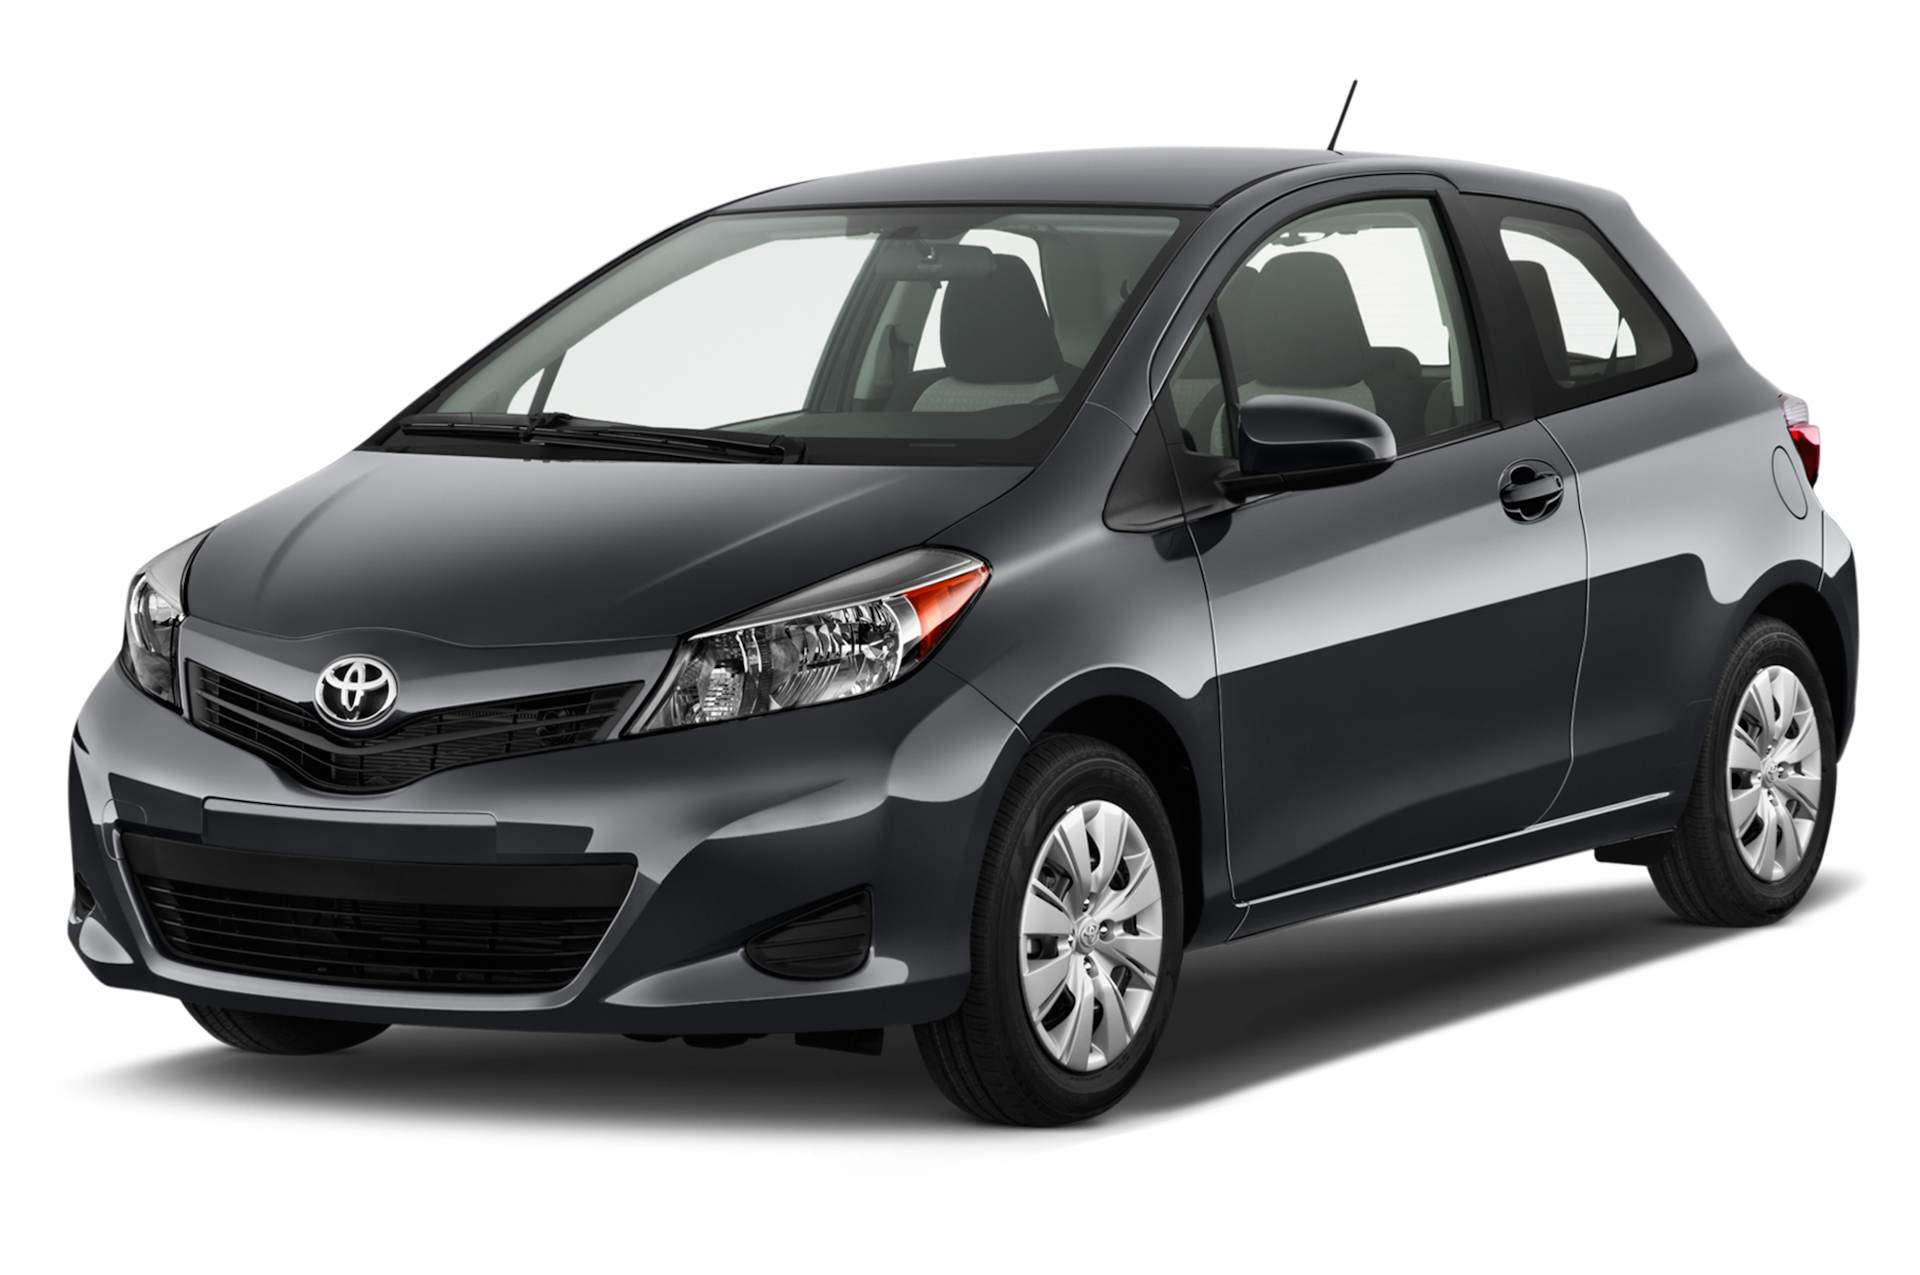 2012 Toyota Yaris Prices, Reviews, and Photos - MotorTrend